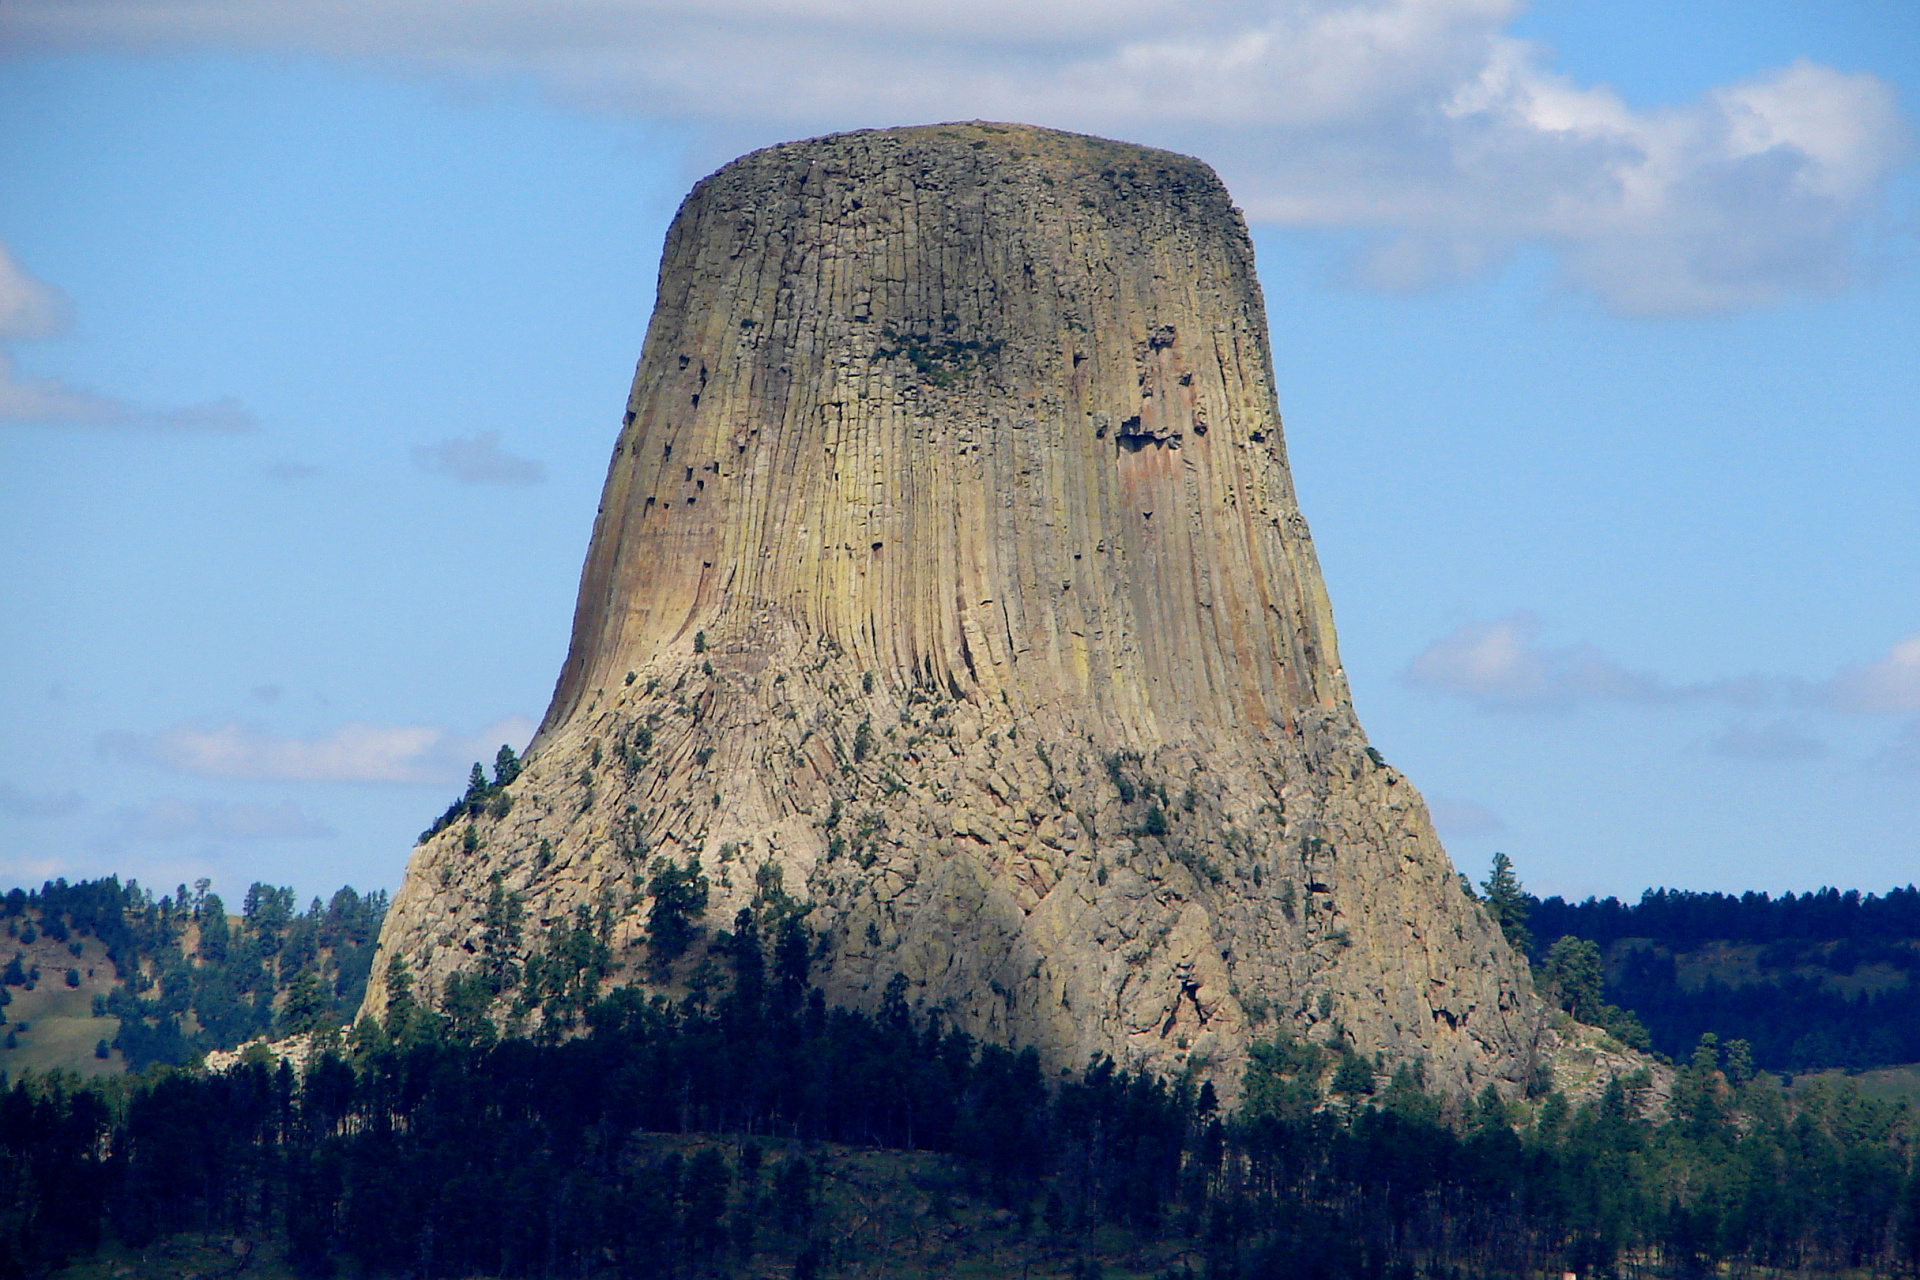 ...from a distance (Travels » US Trip 1: Cheyenne Country » The Journey » Devils Tower)